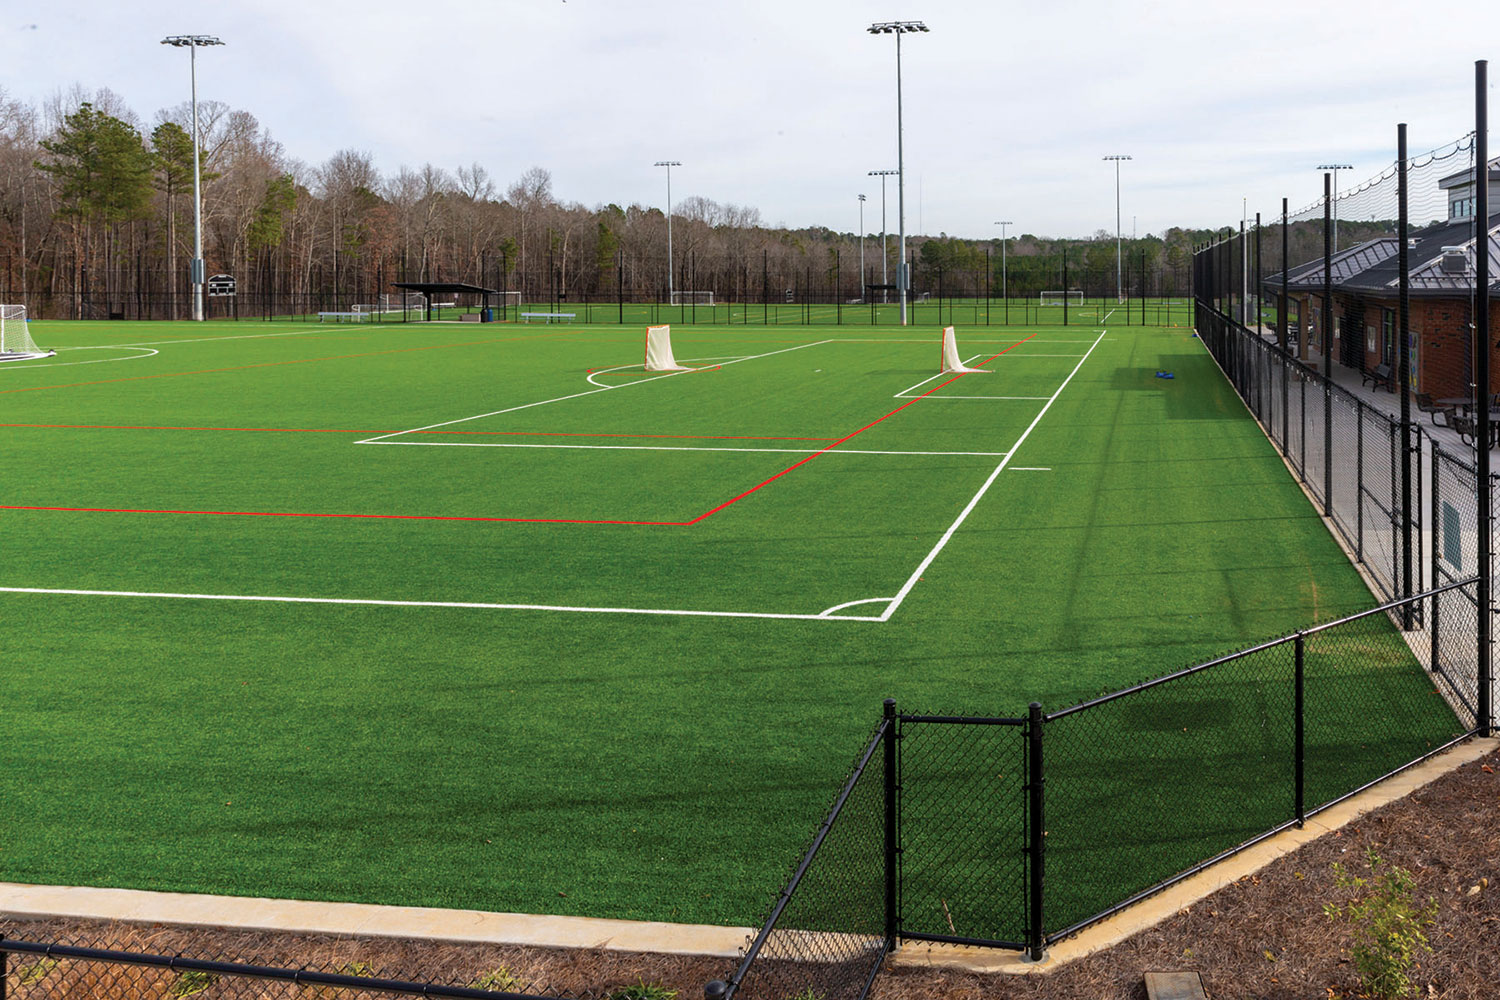 Six full-size turf athletic fields add year-round sports programming opportunities to the town of Apex’s abundant parks and recreation offerings.